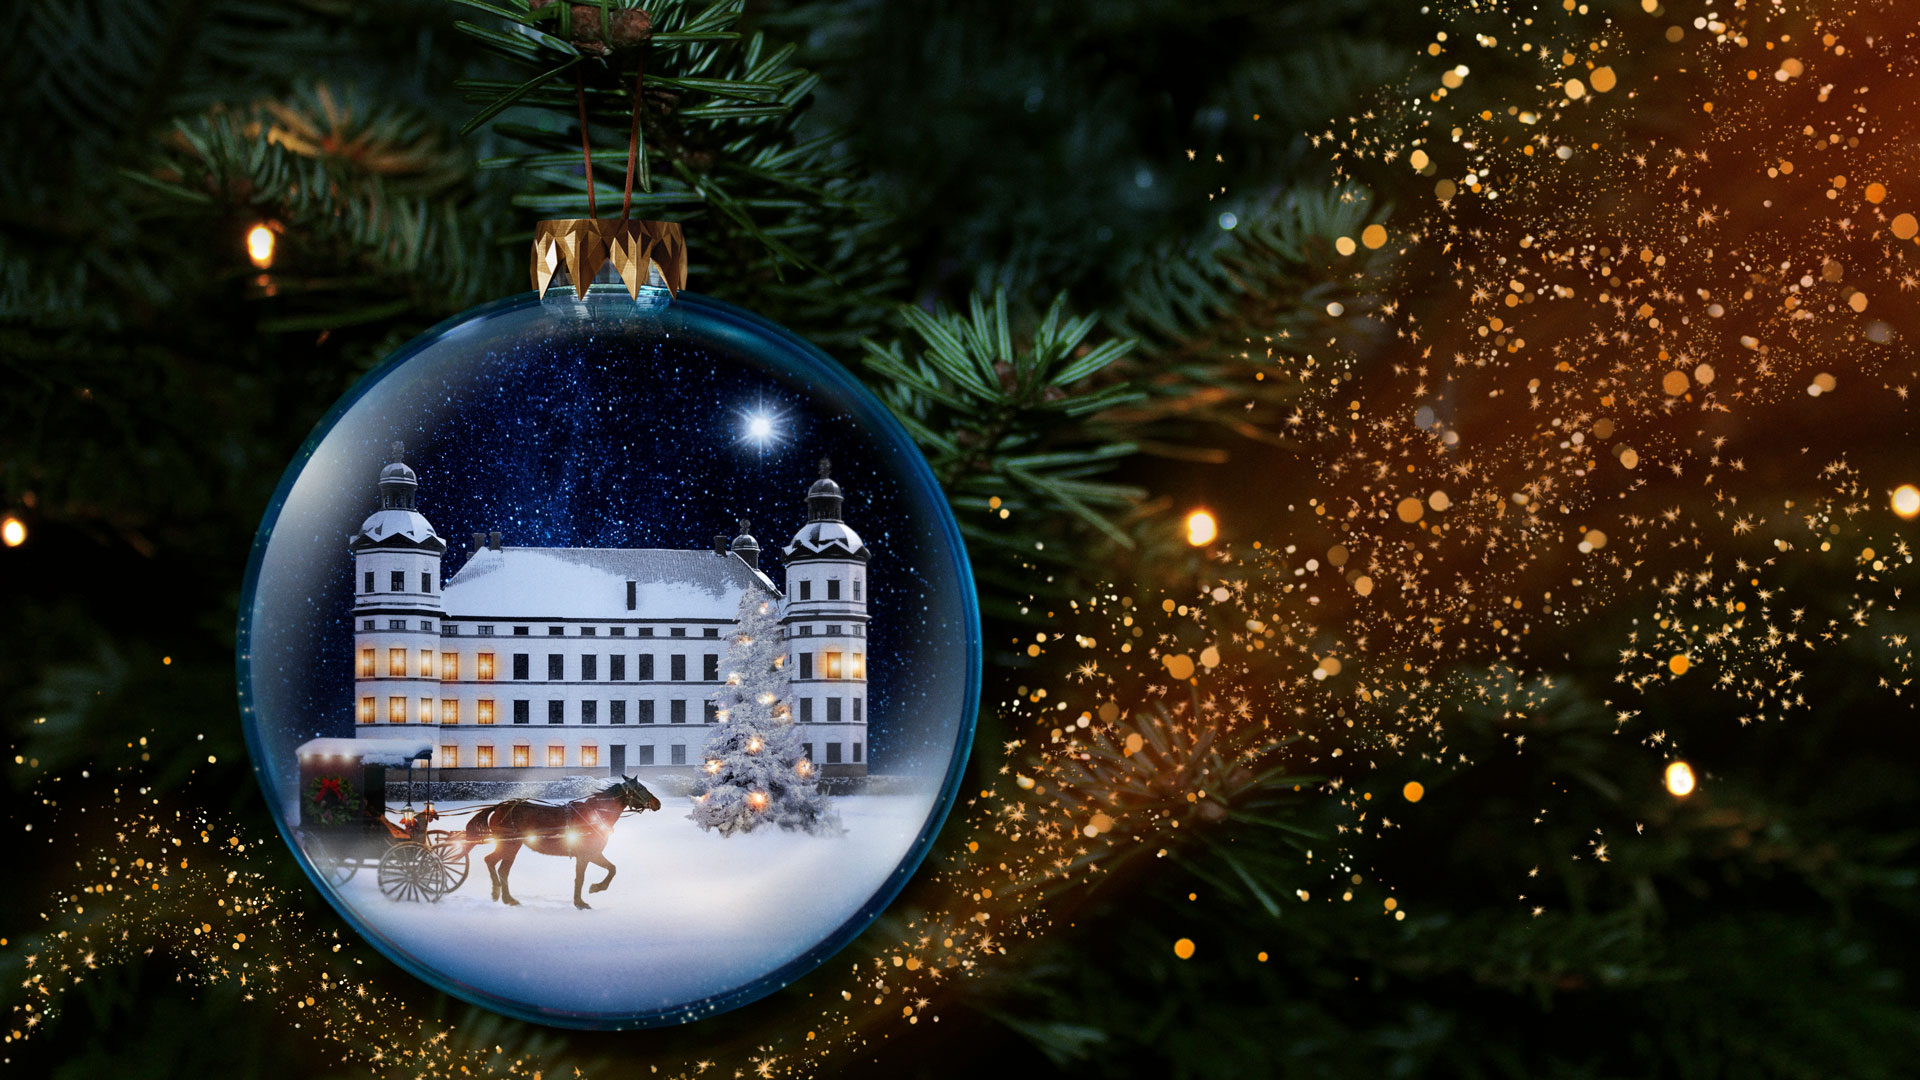 Close-up of a Christmas bauble with a motif of Skokloster Castle and an old beautiful sleigh and horse. The ball hangs on a Christmas tree.